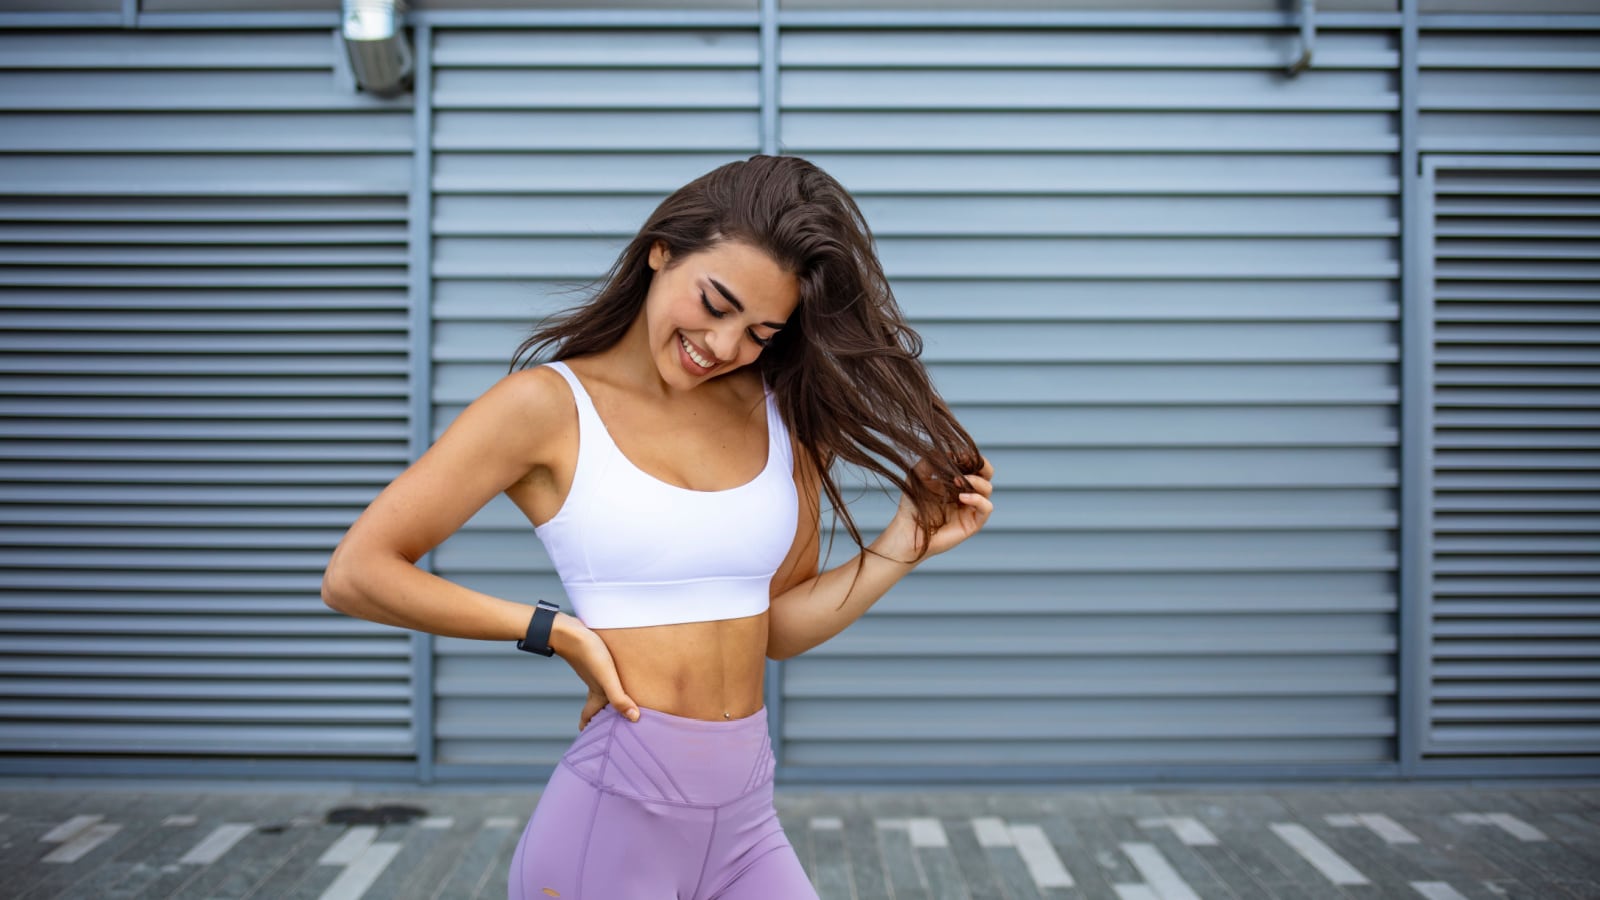 Slim young woman in sport outfit, happy, joyful, jumping. Happy young woman in sports clothing smiling. Muscular fitness model on black background looking away at copy space.